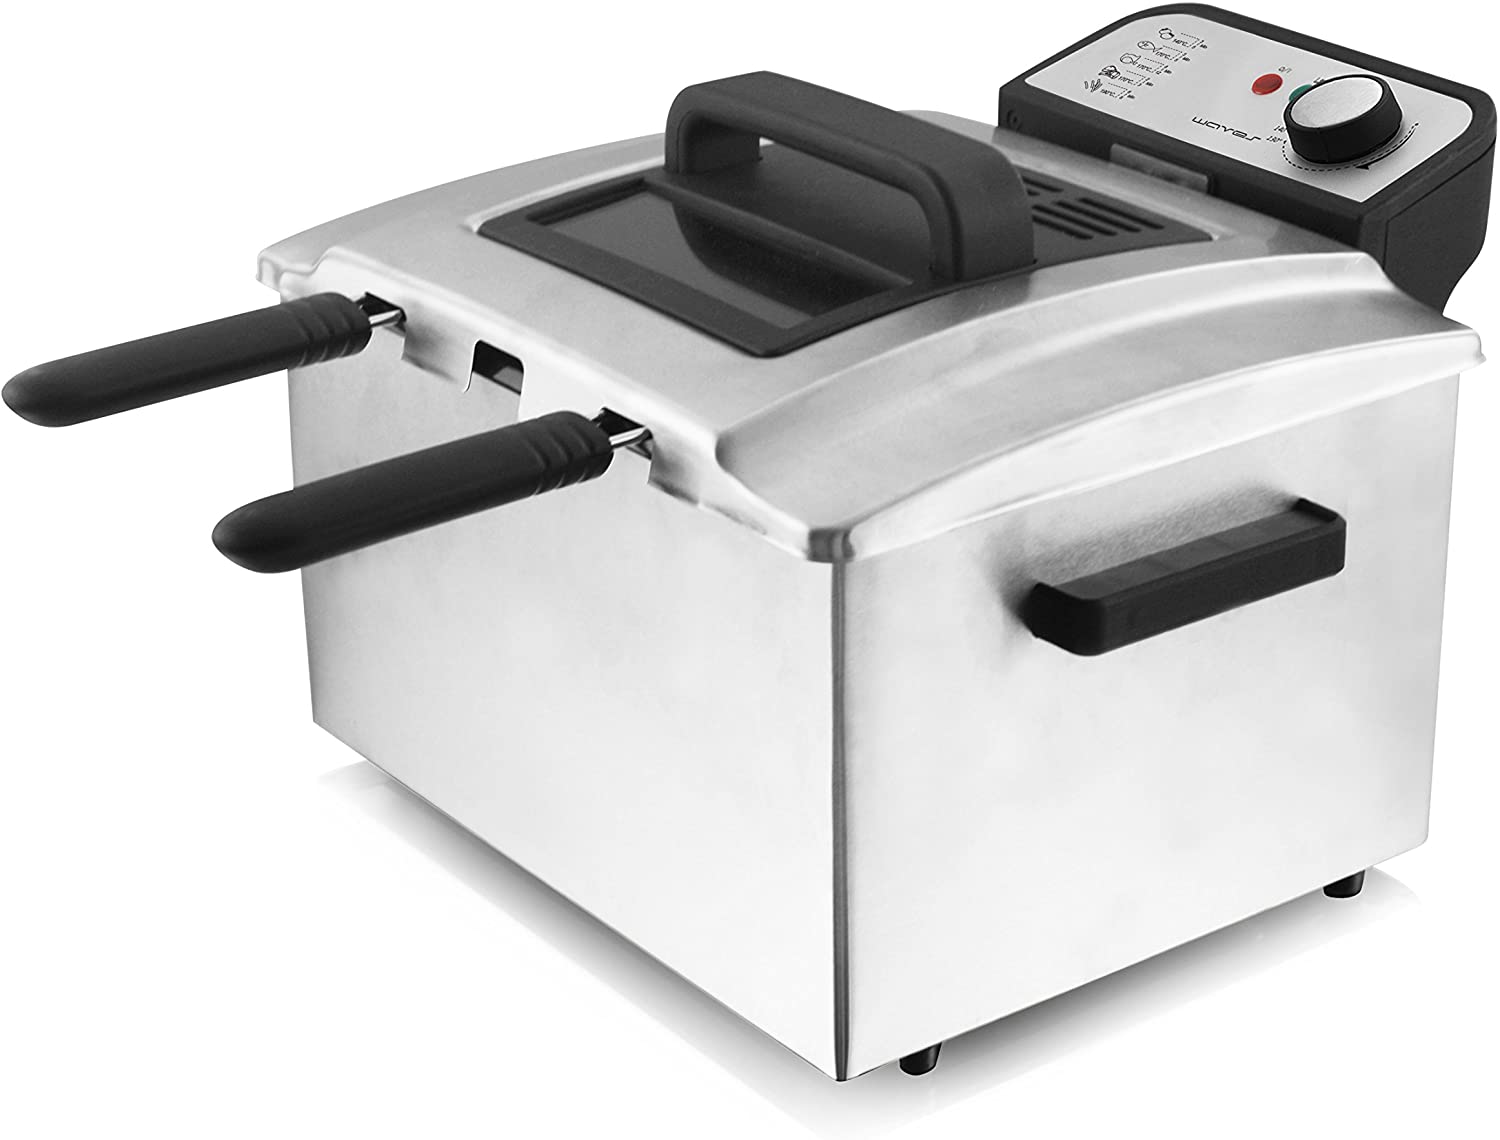 Emerio Deep fryer, cold zone, 5 L, thermostat, 2 cl and 1 large basket